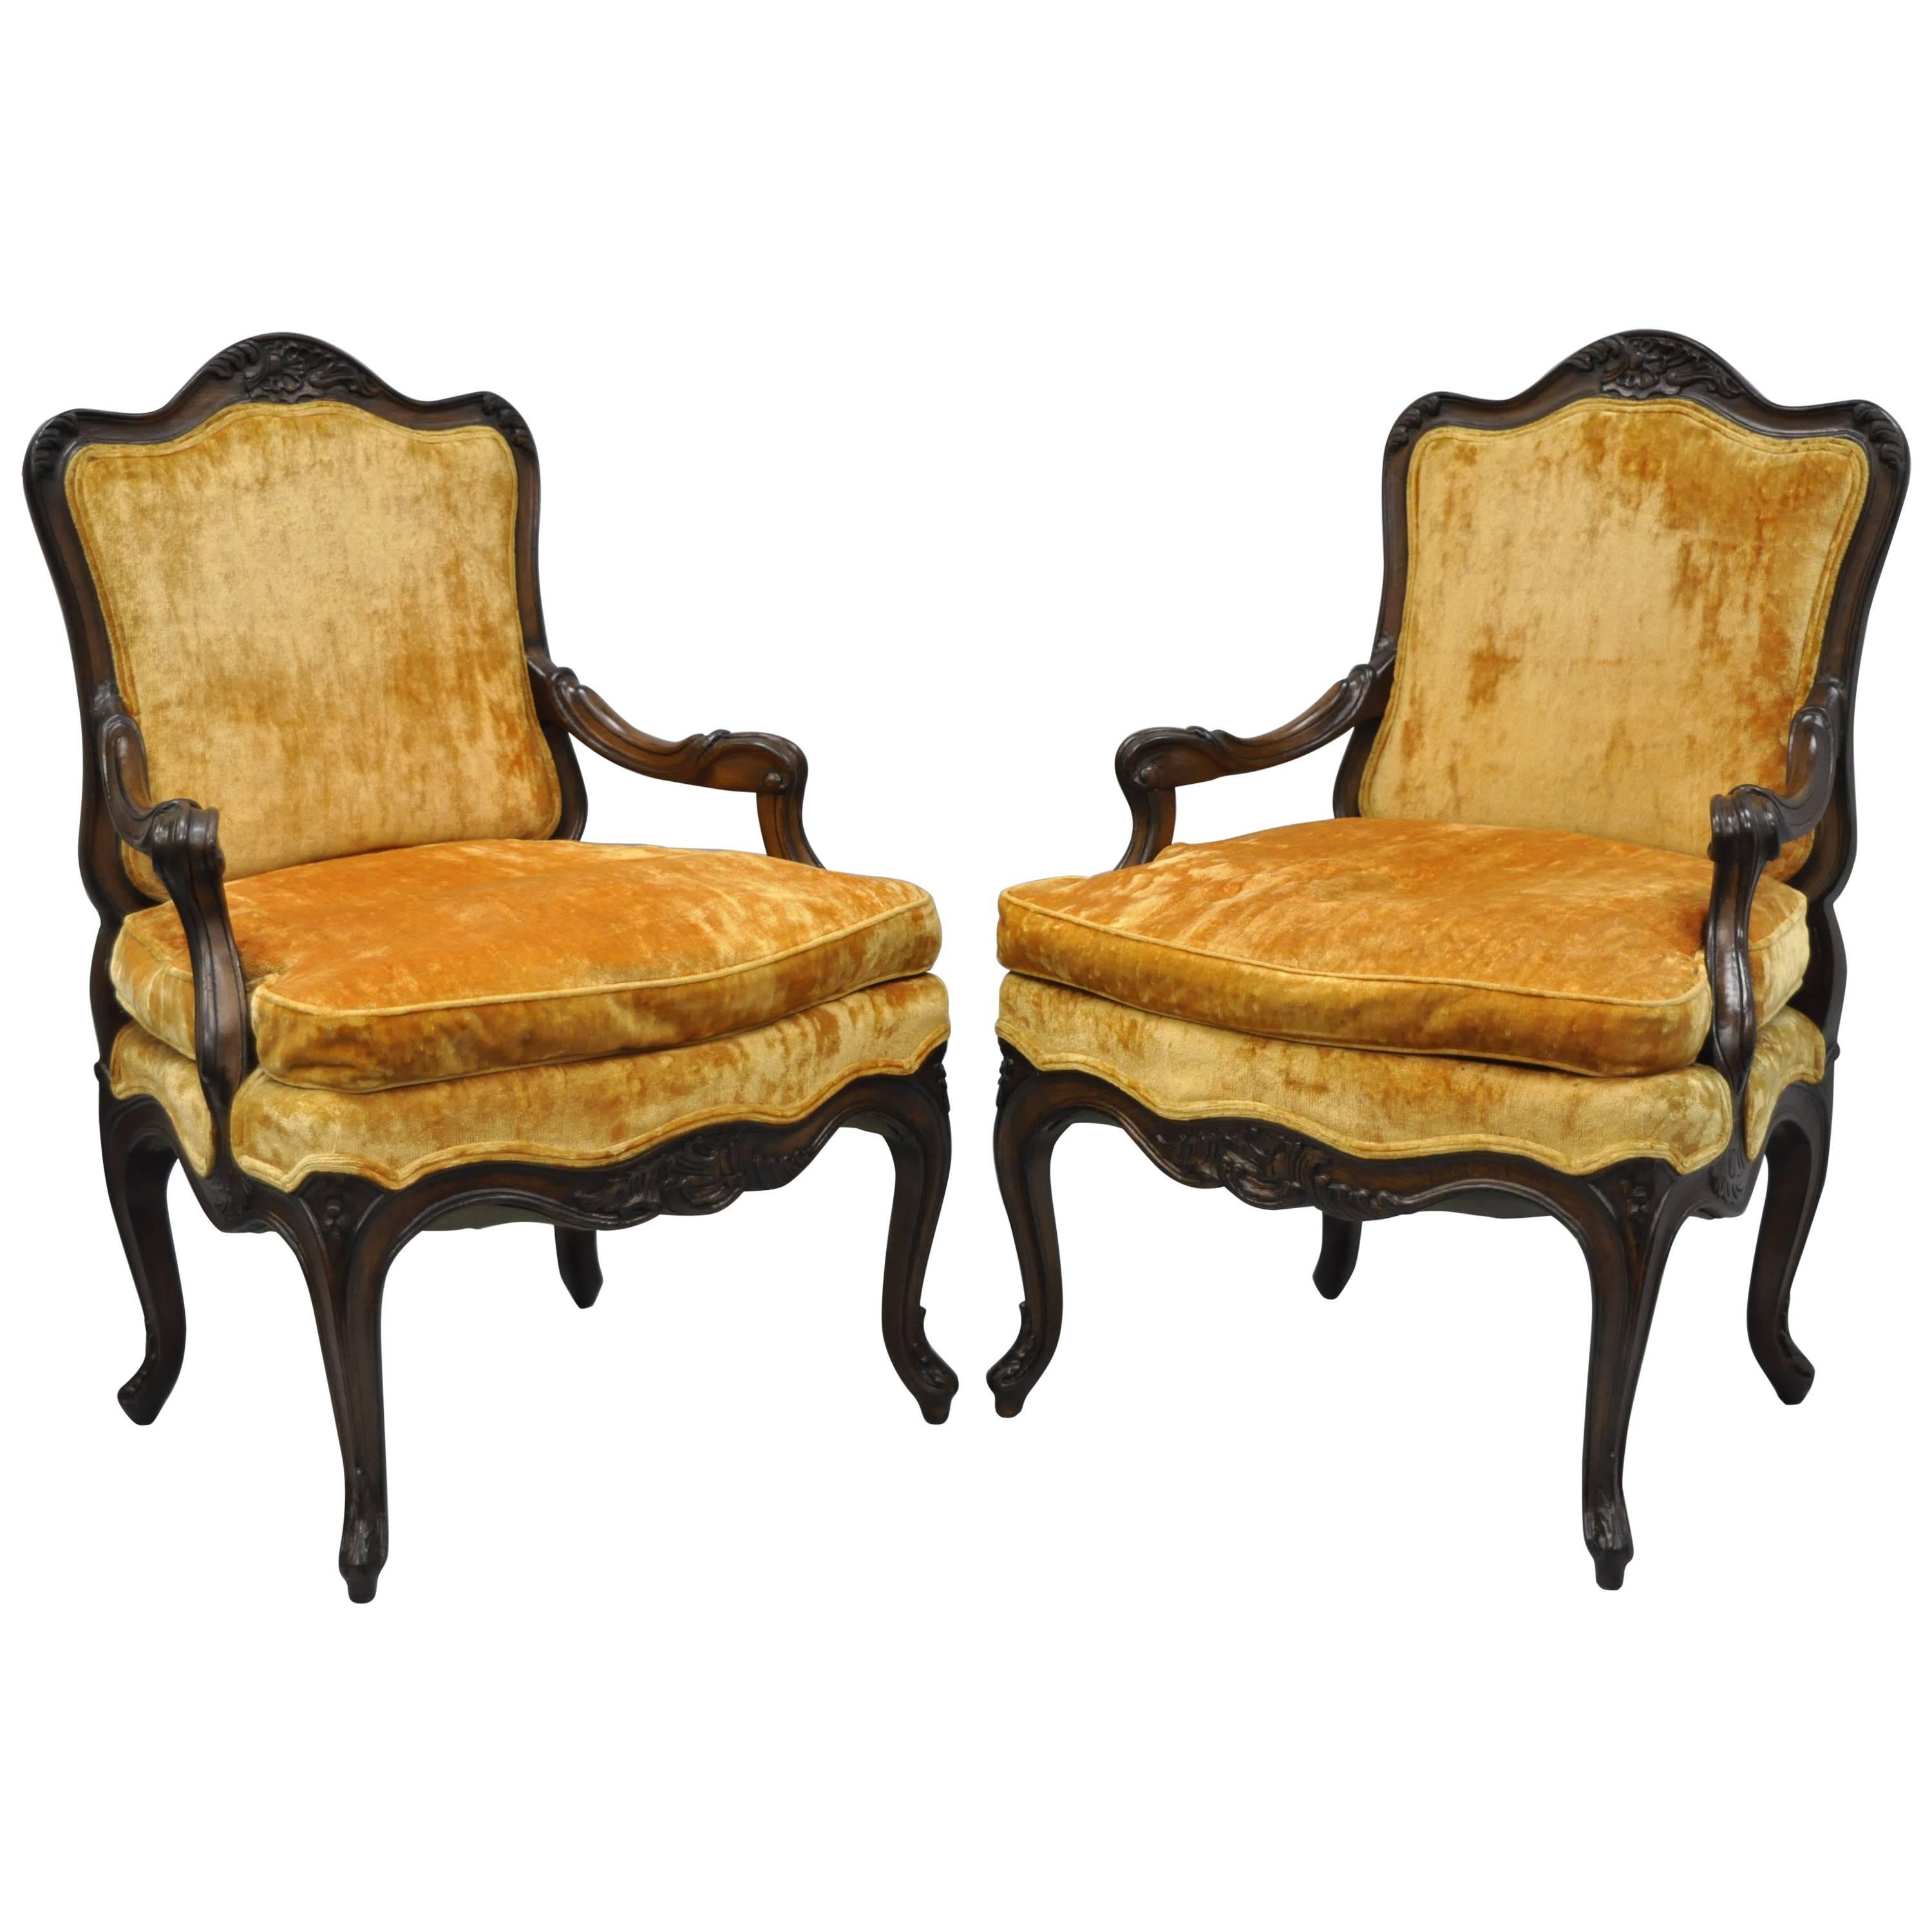 Pair of Vintage Hollywood Regency French Provincial Louis XV Style Arm Chairs